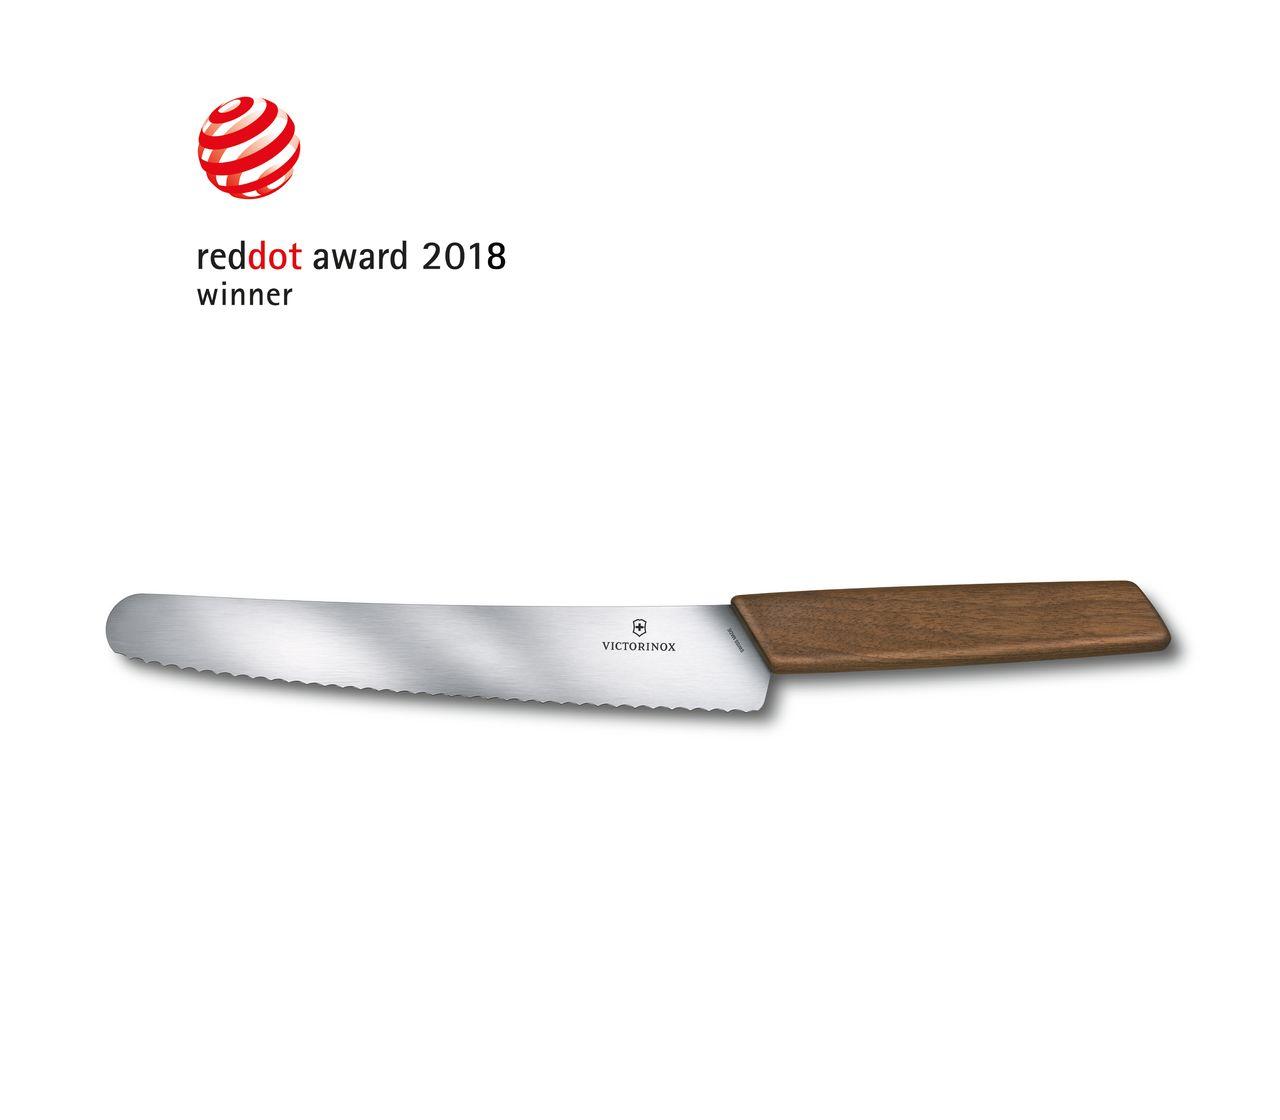 Swiss Modern Bread and Pastry Knife-6.9070.22WG